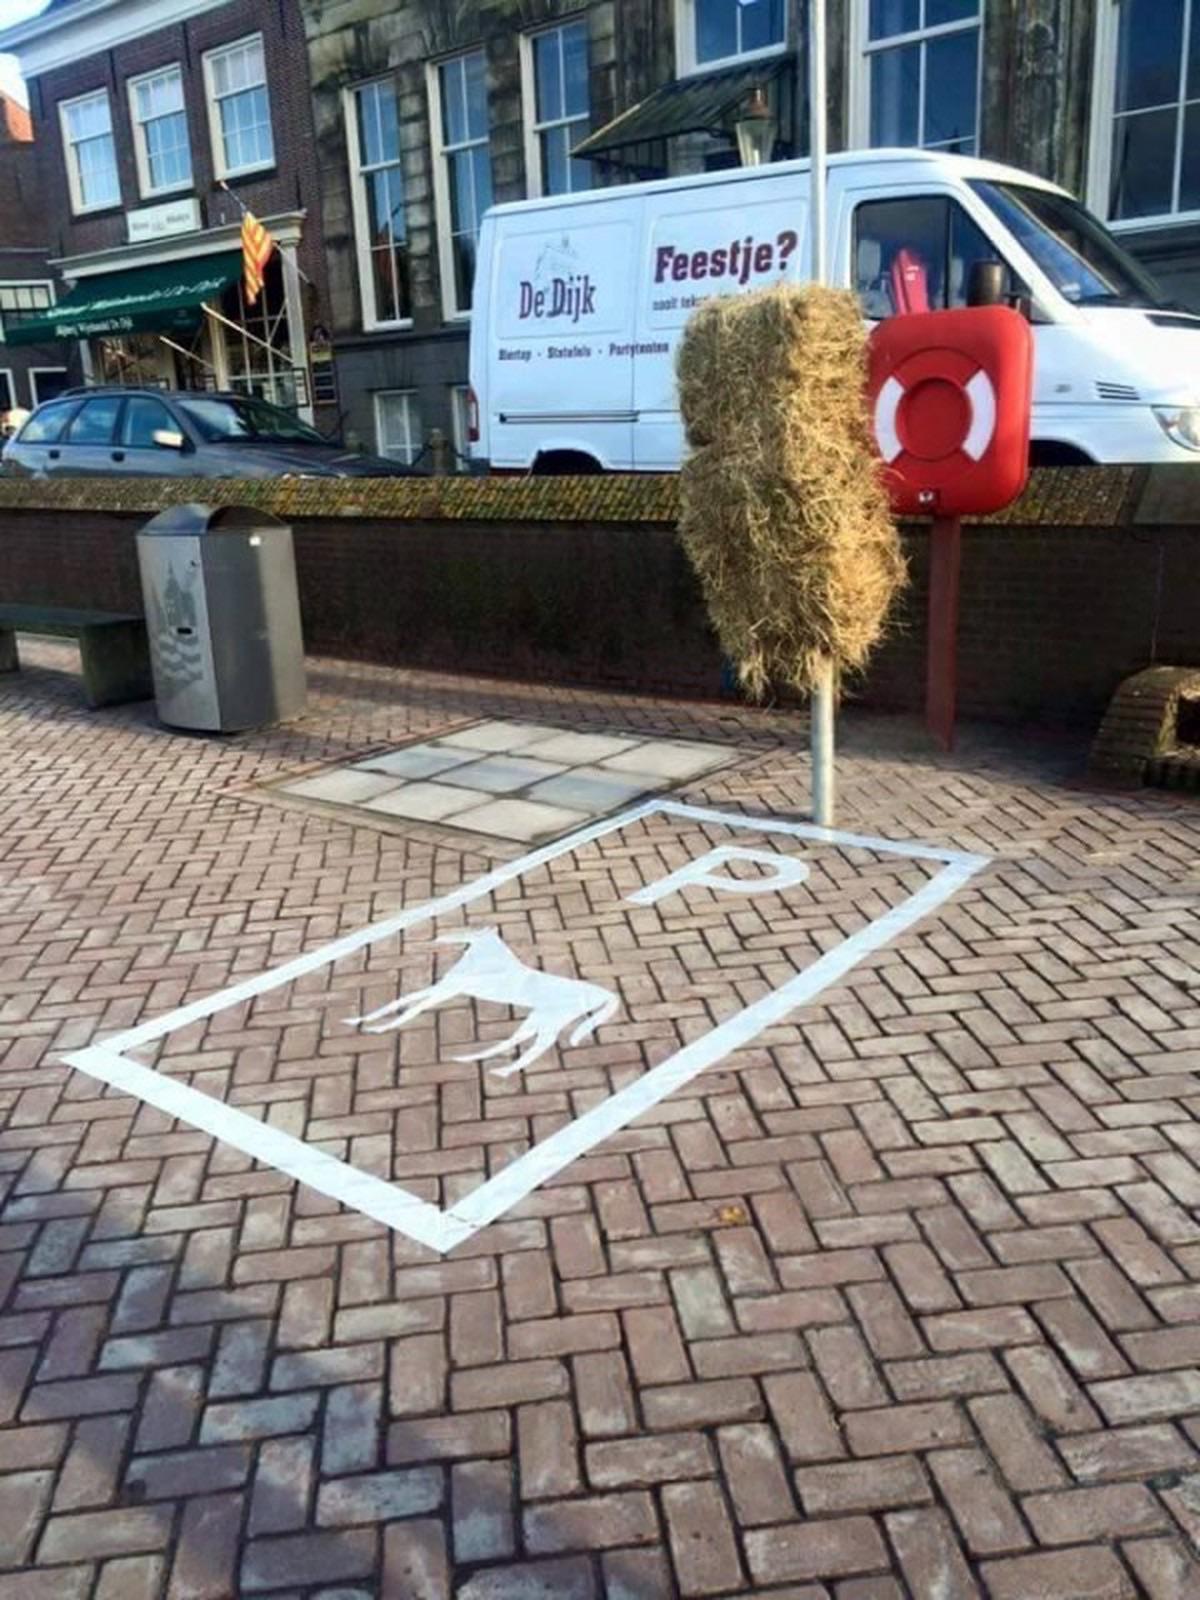 Parking spot for horses in the Netherlands.